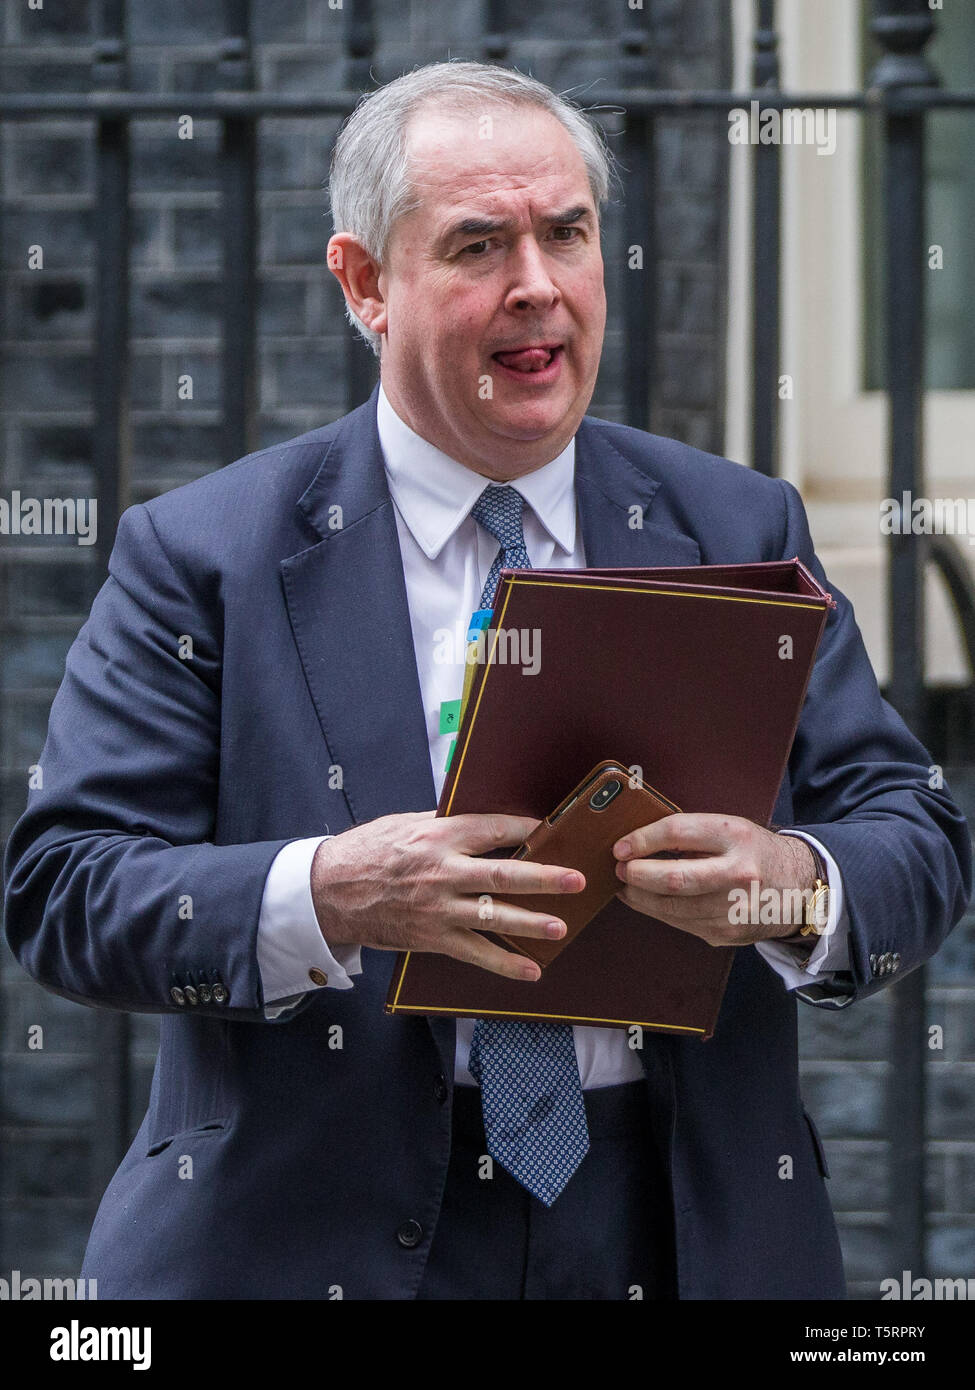 Ministers depart Downing Street following Cabinet Meeting.  Featuring: Geoffrey Cox QC MP Where: London, United Kingdom When: 26 Mar 2019 Credit: Wheatley/WENN Stock Photo